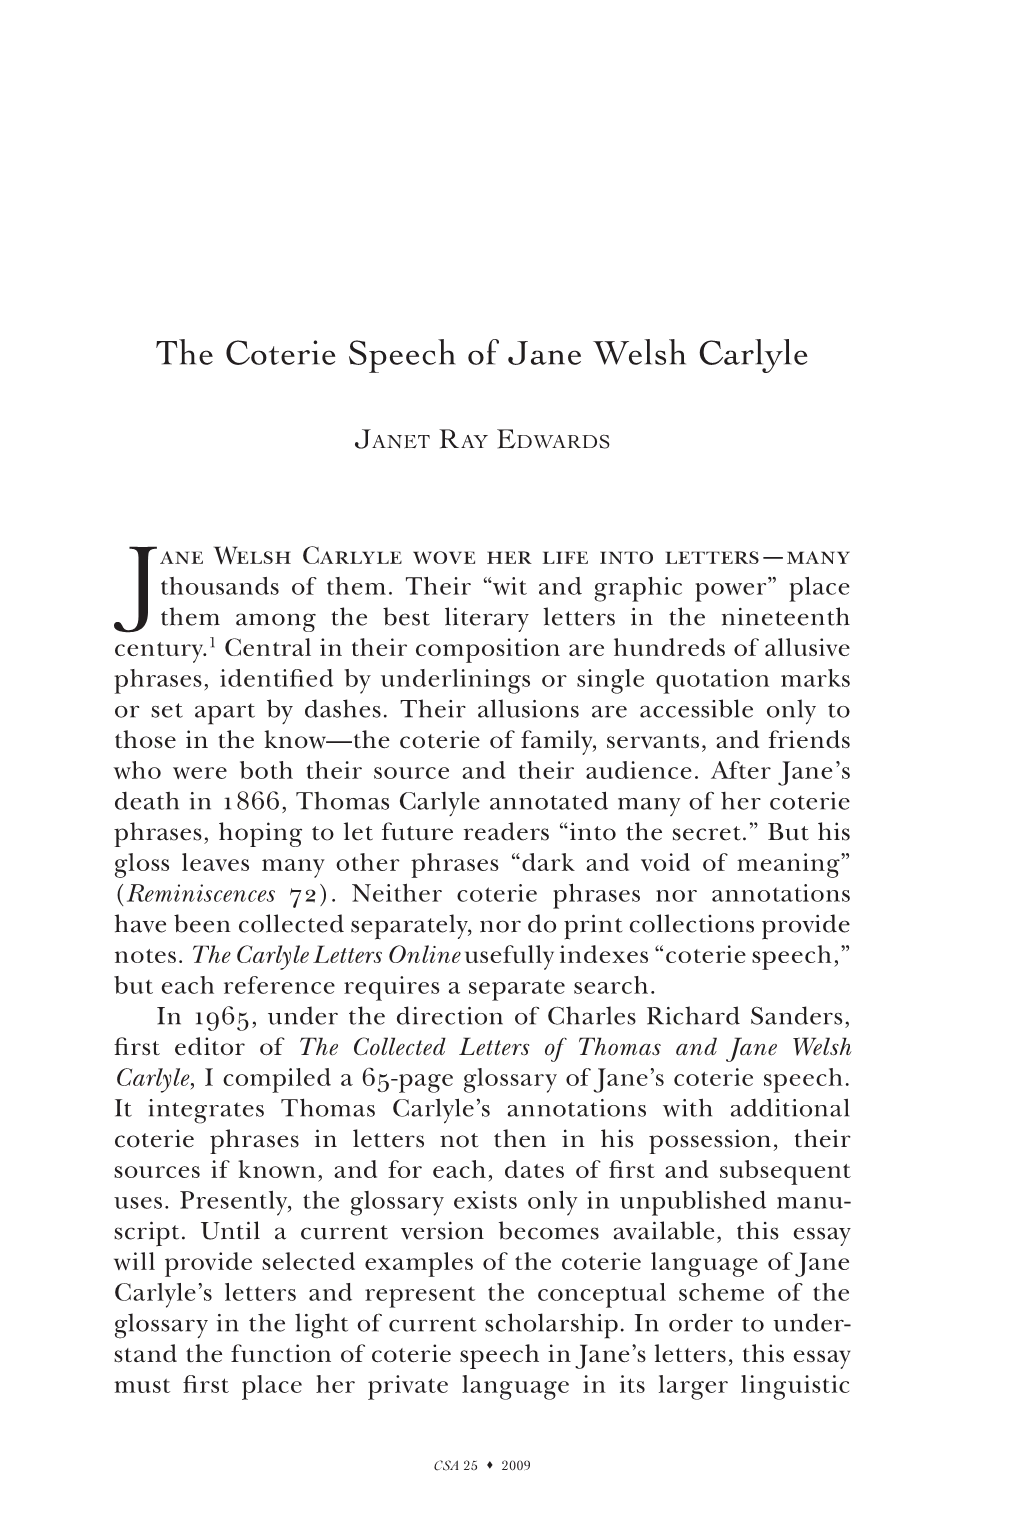 The Coterie Speech of Jane Welsh Carlyle